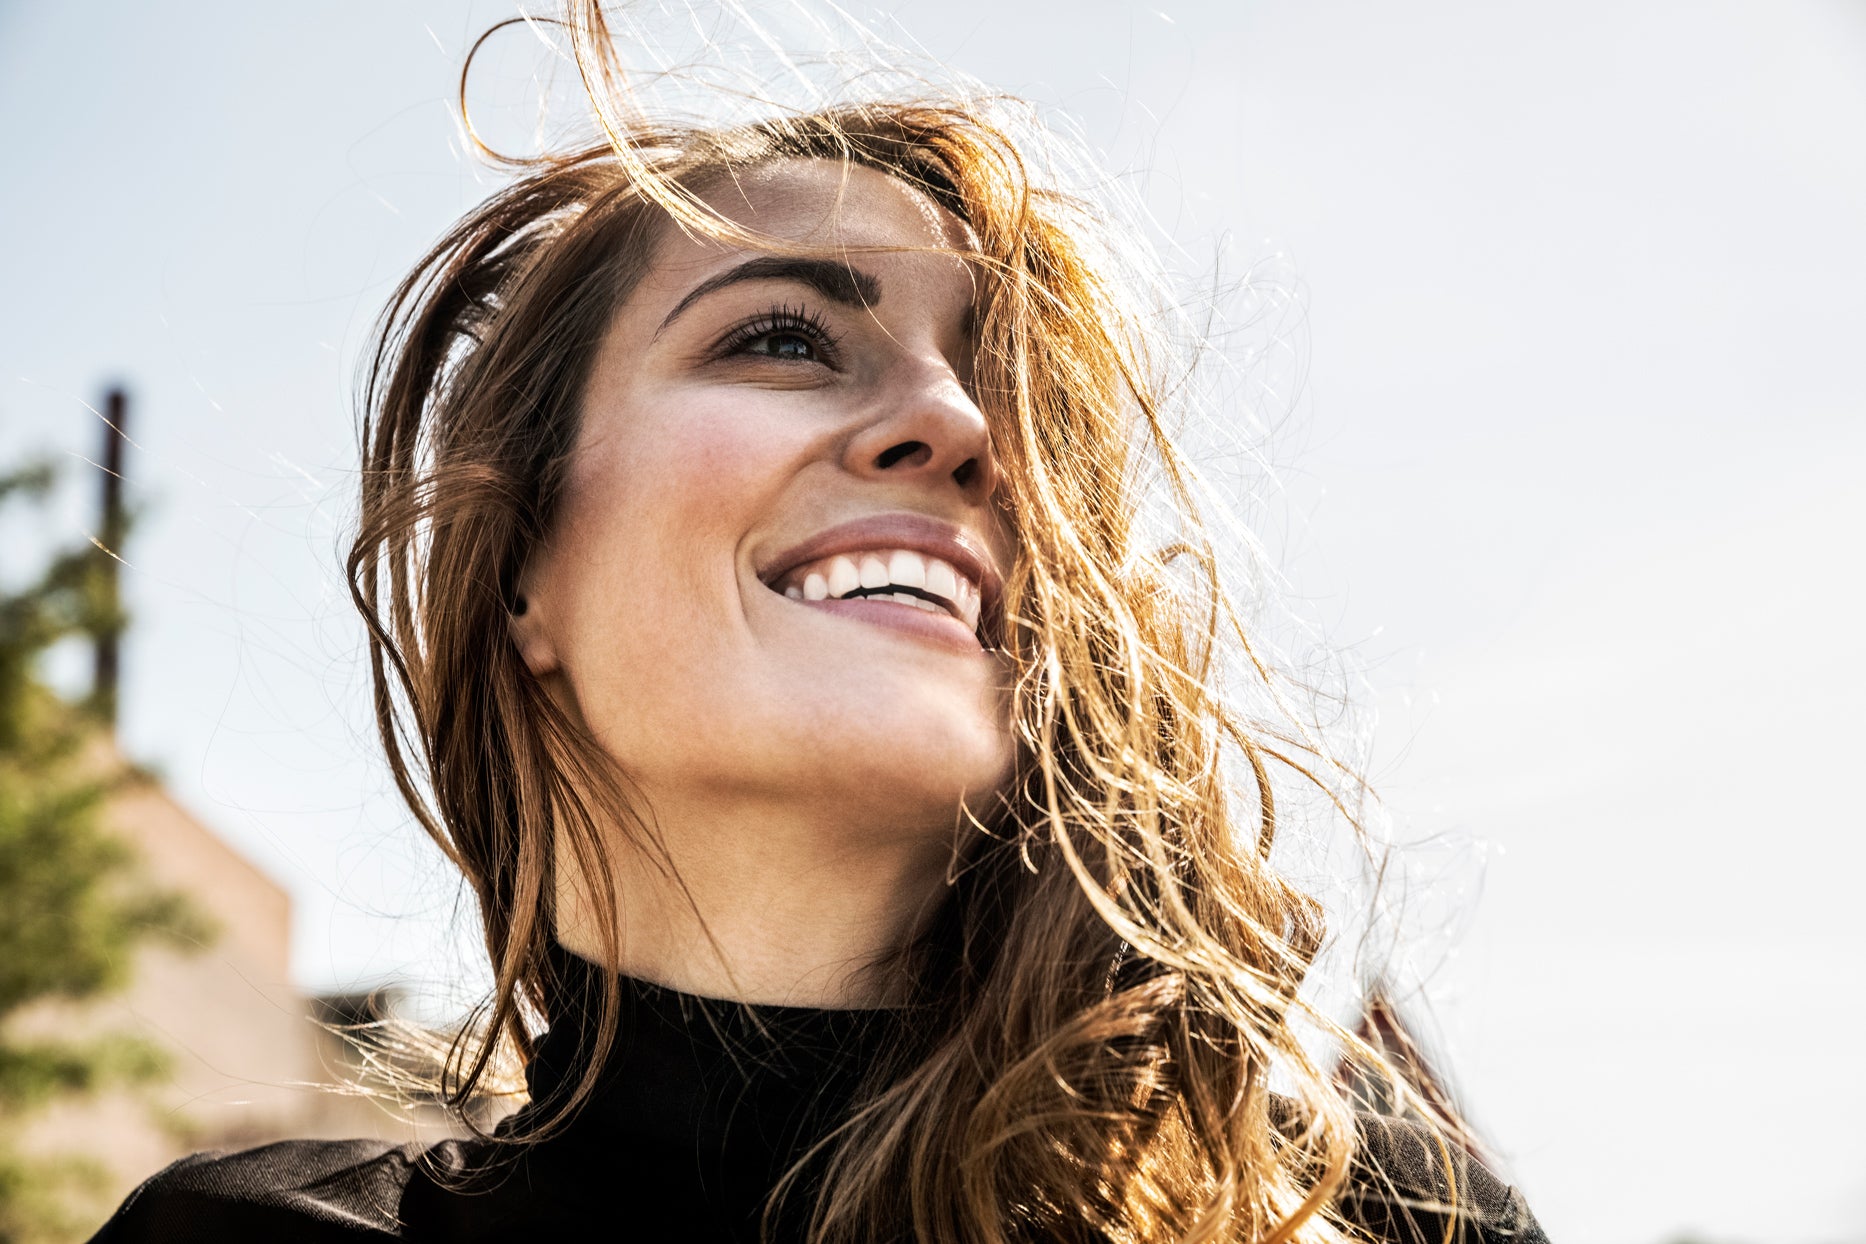   ADVERTISEMENT Save Pin  More woman smiling while hair blows in wind  CREDIT: WESTEND61 / GETTY IMAGES